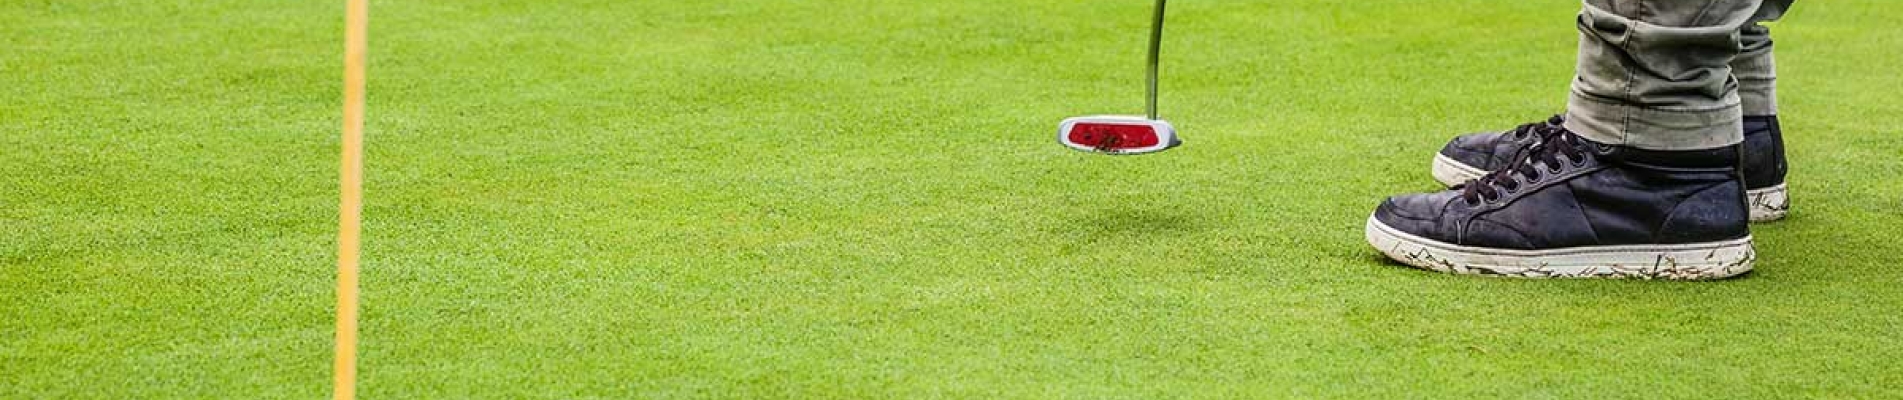 Artificial Turf for Golf Courses